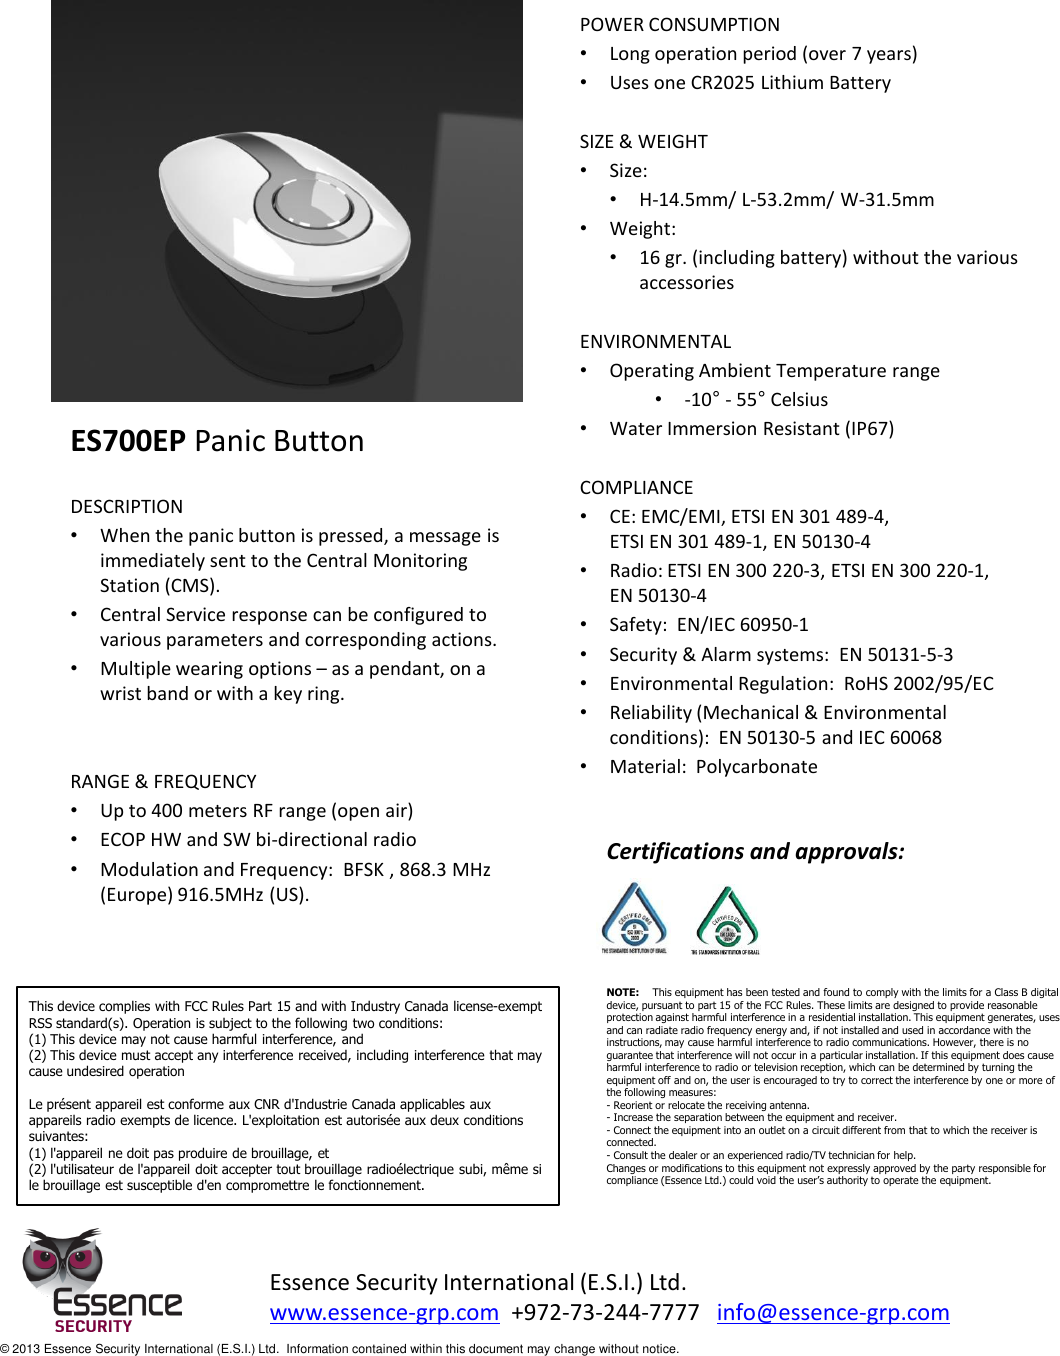               ES700EP Panic Button  DESCRIPTION •When the panic button is pressed, a message is immediately sent to the Central Monitoring Station (CMS).   •Central Service response can be configured to various parameters and corresponding actions. •Multiple wearing options – as a pendant, on a wrist band or with a key ring.   RANGE &amp; FREQUENCY •Up to 400 meters RF range (open air) •ECOP HW and SW bi-directional radio •Modulation and Frequency:  BFSK , 868.3 MHz (Europe) 916.5MHz (US).        POWER CONSUMPTION •Long operation period (over 7 years)  •Uses one CR2025 Lithium Battery   SIZE &amp; WEIGHT •Size: •H-14.5mm/ L-53.2mm/ W-31.5mm •Weight: •16 gr. (including battery) without the various accessories  ENVIRONMENTAL •Operating Ambient Temperature range   •-10° - 55° Celsius •Water Immersion Resistant (IP67)  COMPLIANCE •CE: EMC/EMI, ETSI EN 301 489-4,  ETSI EN 301 489-1, EN 50130-4  •Radio: ETSI EN 300 220-3, ETSI EN 300 220-1,  EN 50130-4  •Safety:  EN/IEC 60950-1 •Security &amp; Alarm systems:  EN 50131-5-3  •Environmental Regulation:  RoHS 2002/95/EC •Reliability (Mechanical &amp; Environmental conditions):  EN 50130-5 and IEC 60068 •Material:  Polycarbonate  Essence Security International (E.S.I.) Ltd. www.essence-grp.com  +972-73-244-7777   info@essence-grp.com   © 2013 Essence Security International (E.S.I.) Ltd.  Information contained within this document may change without notice. Certifications and approvals: This device complies with FCC Rules Part 15 and with Industry Canada license-exempt RSS standard(s). Operation is subject to the following two conditions: (1) This device may not cause harmful interference, and (2) This device must accept any interference received, including interference that may cause undesired operation  Le présent appareil est conforme aux CNR d&apos;Industrie Canada applicables aux appareils radio exempts de licence. L&apos;exploitation est autorisée aux deux conditions suivantes: (1) l&apos;appareil ne doit pas produire de brouillage, et (2) l&apos;utilisateur de l&apos;appareil doit accepter tout brouillage radioélectrique subi, même si le brouillage est susceptible d&apos;en compromettre le fonctionnement. NOTE:    This equipment has been tested and found to comply with the limits for a Class B digital device, pursuant to part 15 of the FCC Rules. These limits are designed to provide reasonable protection against harmful interference in a residential installation. This equipment generates, uses and can radiate radio frequency energy and, if not installed and used in accordance with the instructions, may cause harmful interference to radio communications. However, there is no guarantee that interference will not occur in a particular installation. If this equipment does cause harmful interference to radio or television reception, which can be determined by turning the equipment off and on, the user is encouraged to try to correct the interference by one or more of the following measures:  - Reorient or relocate the receiving antenna. - Increase the separation between the equipment and receiver. - Connect the equipment into an outlet on a circuit different from that to which the receiver is connected. - Consult the dealer or an experienced radio/TV technician for help. Changes or modifications to this equipment not expressly approved by the party responsible for compliance (Essence Ltd.) could void the user’s authority to operate the equipment. 